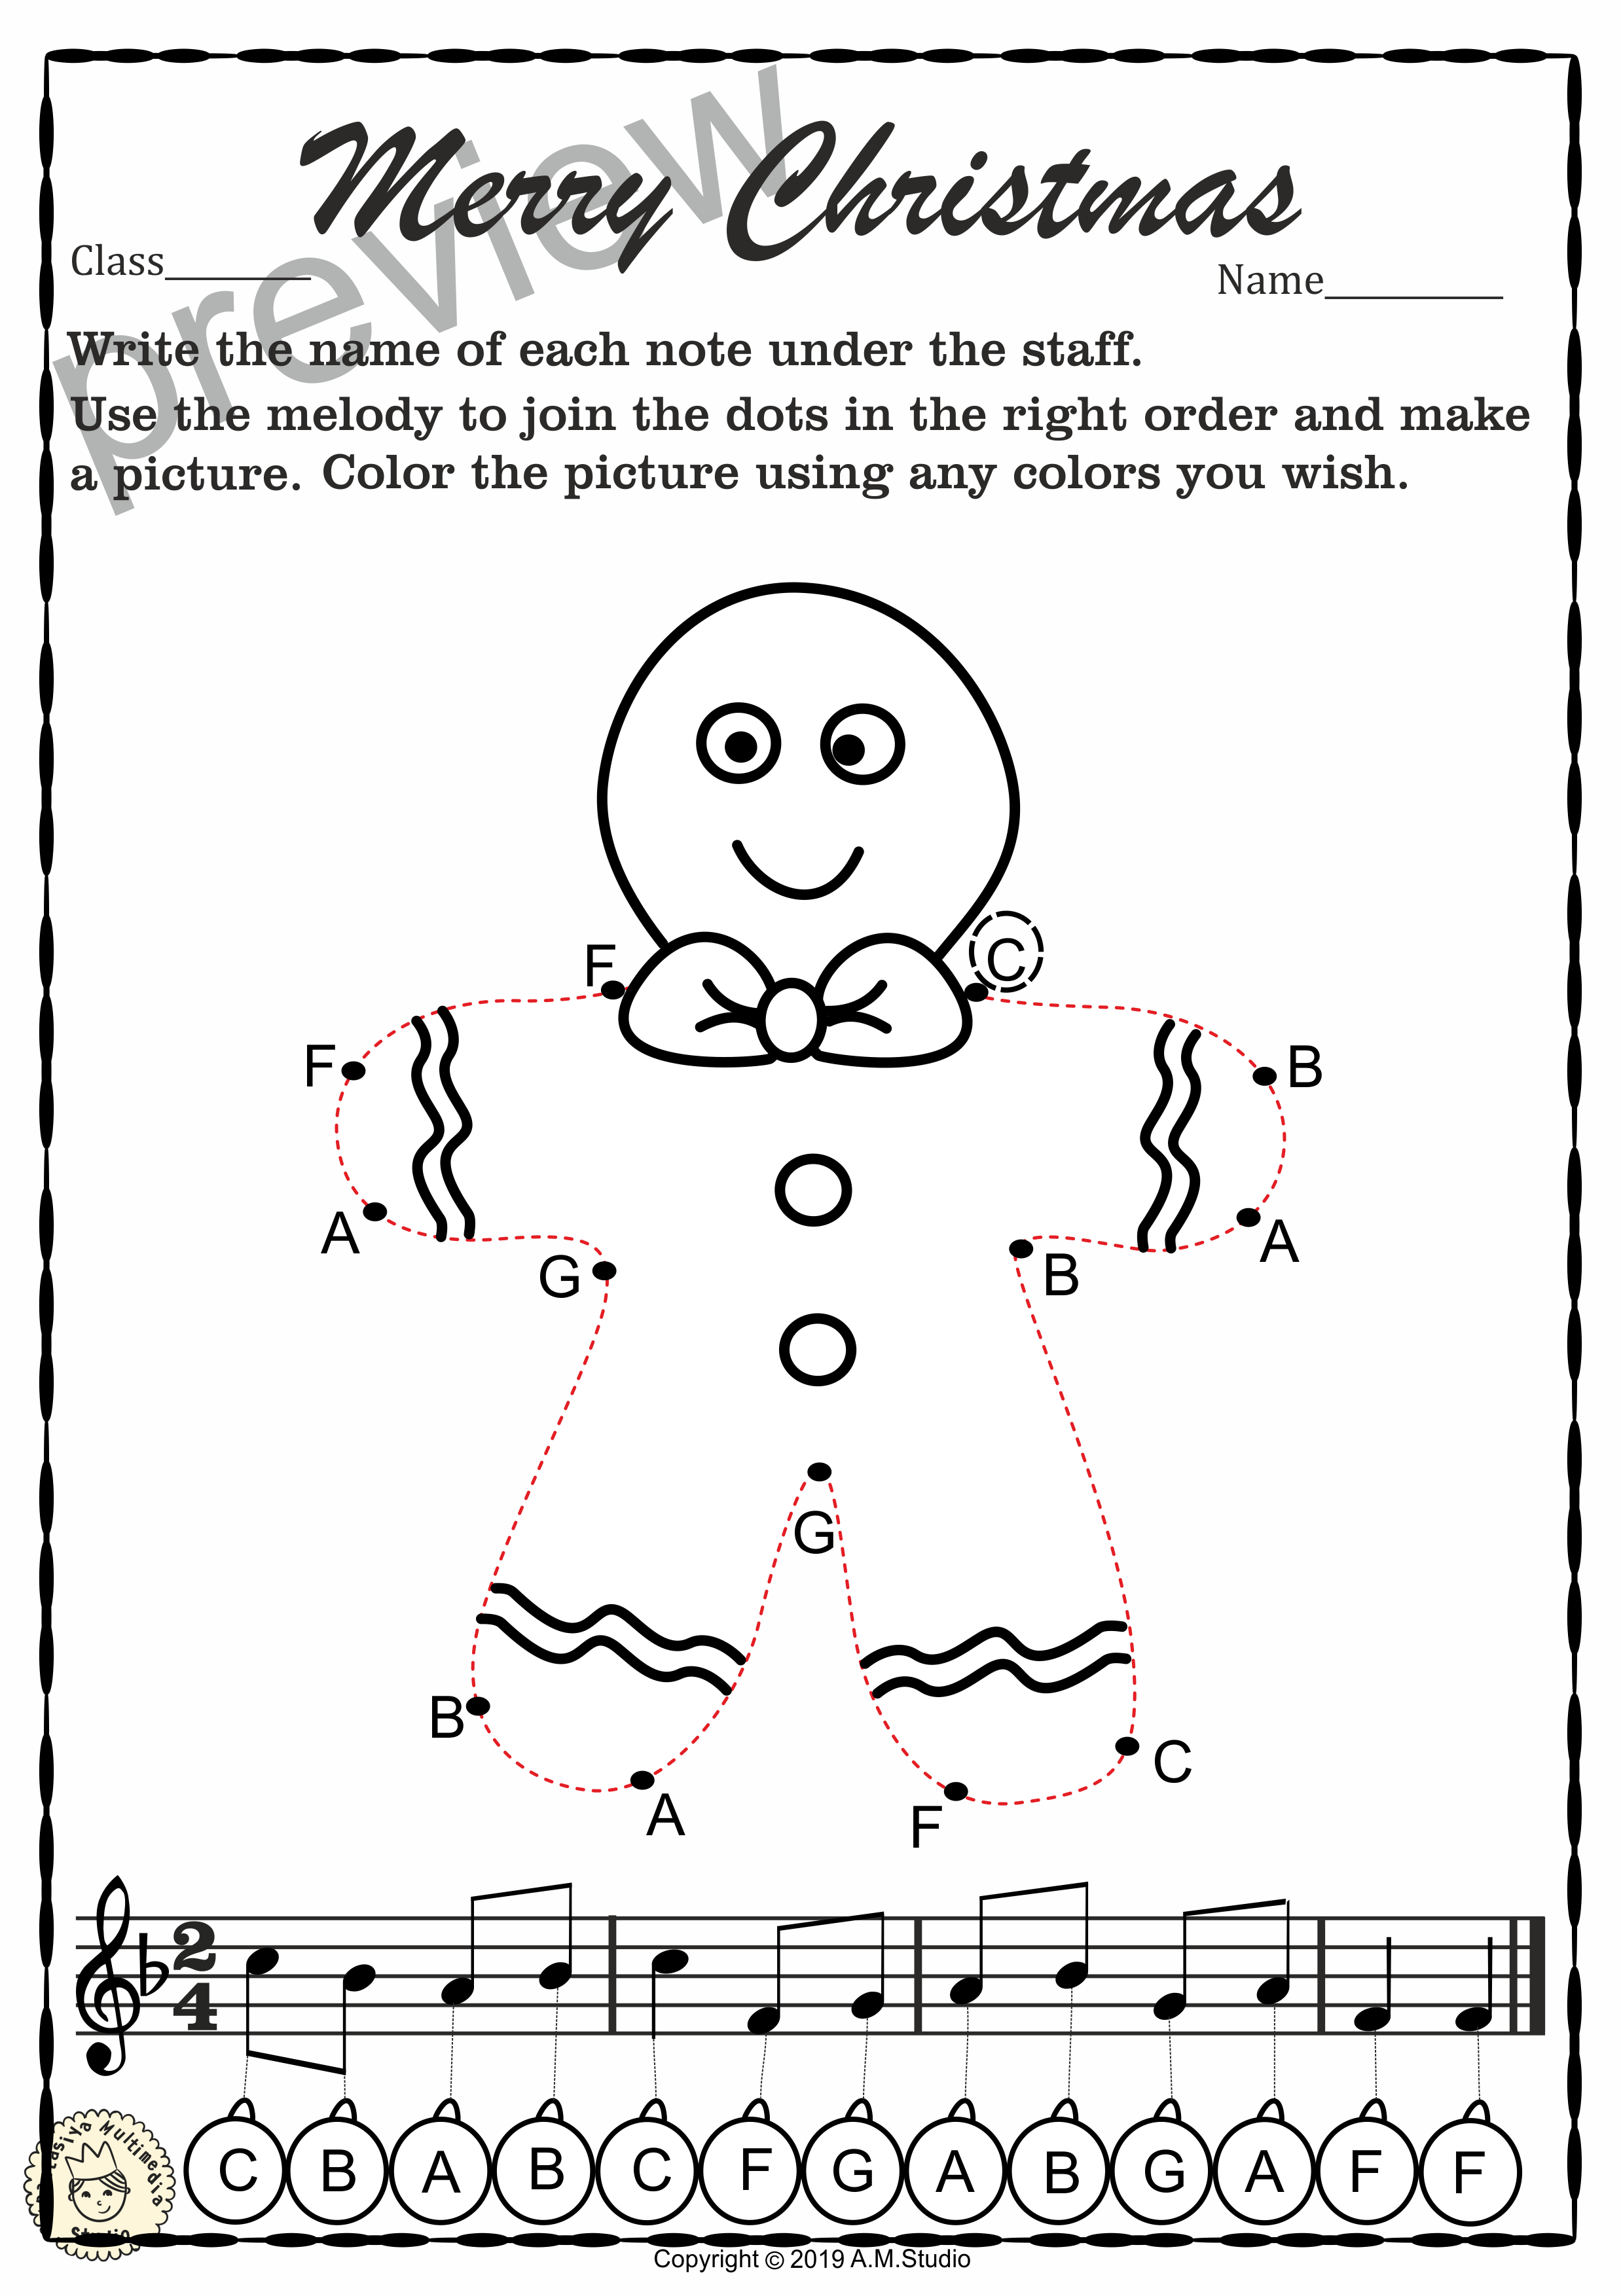 Christmas Dot to Dot Note Reading Worksheets {Treble Clef} with answers (img # 2)